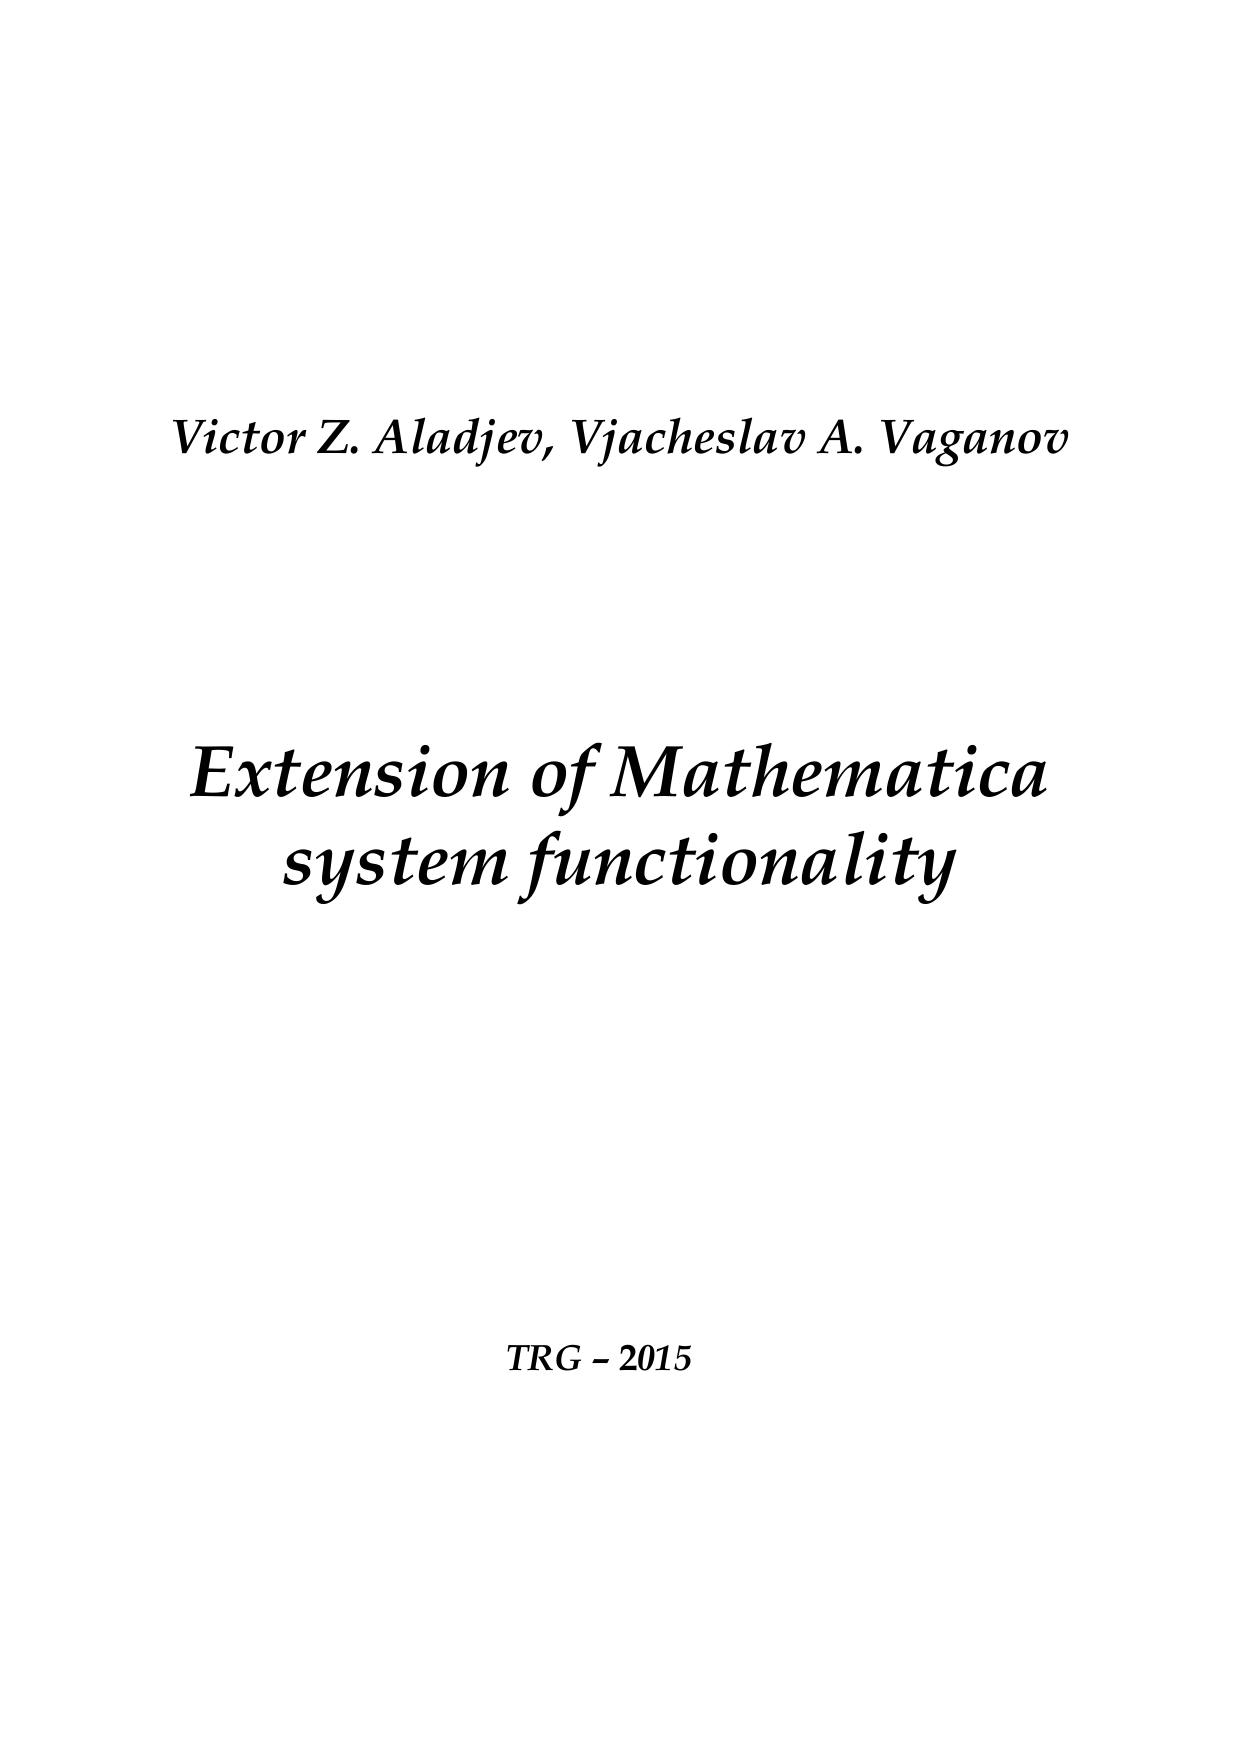 Extension of Mathematica® System Functionality